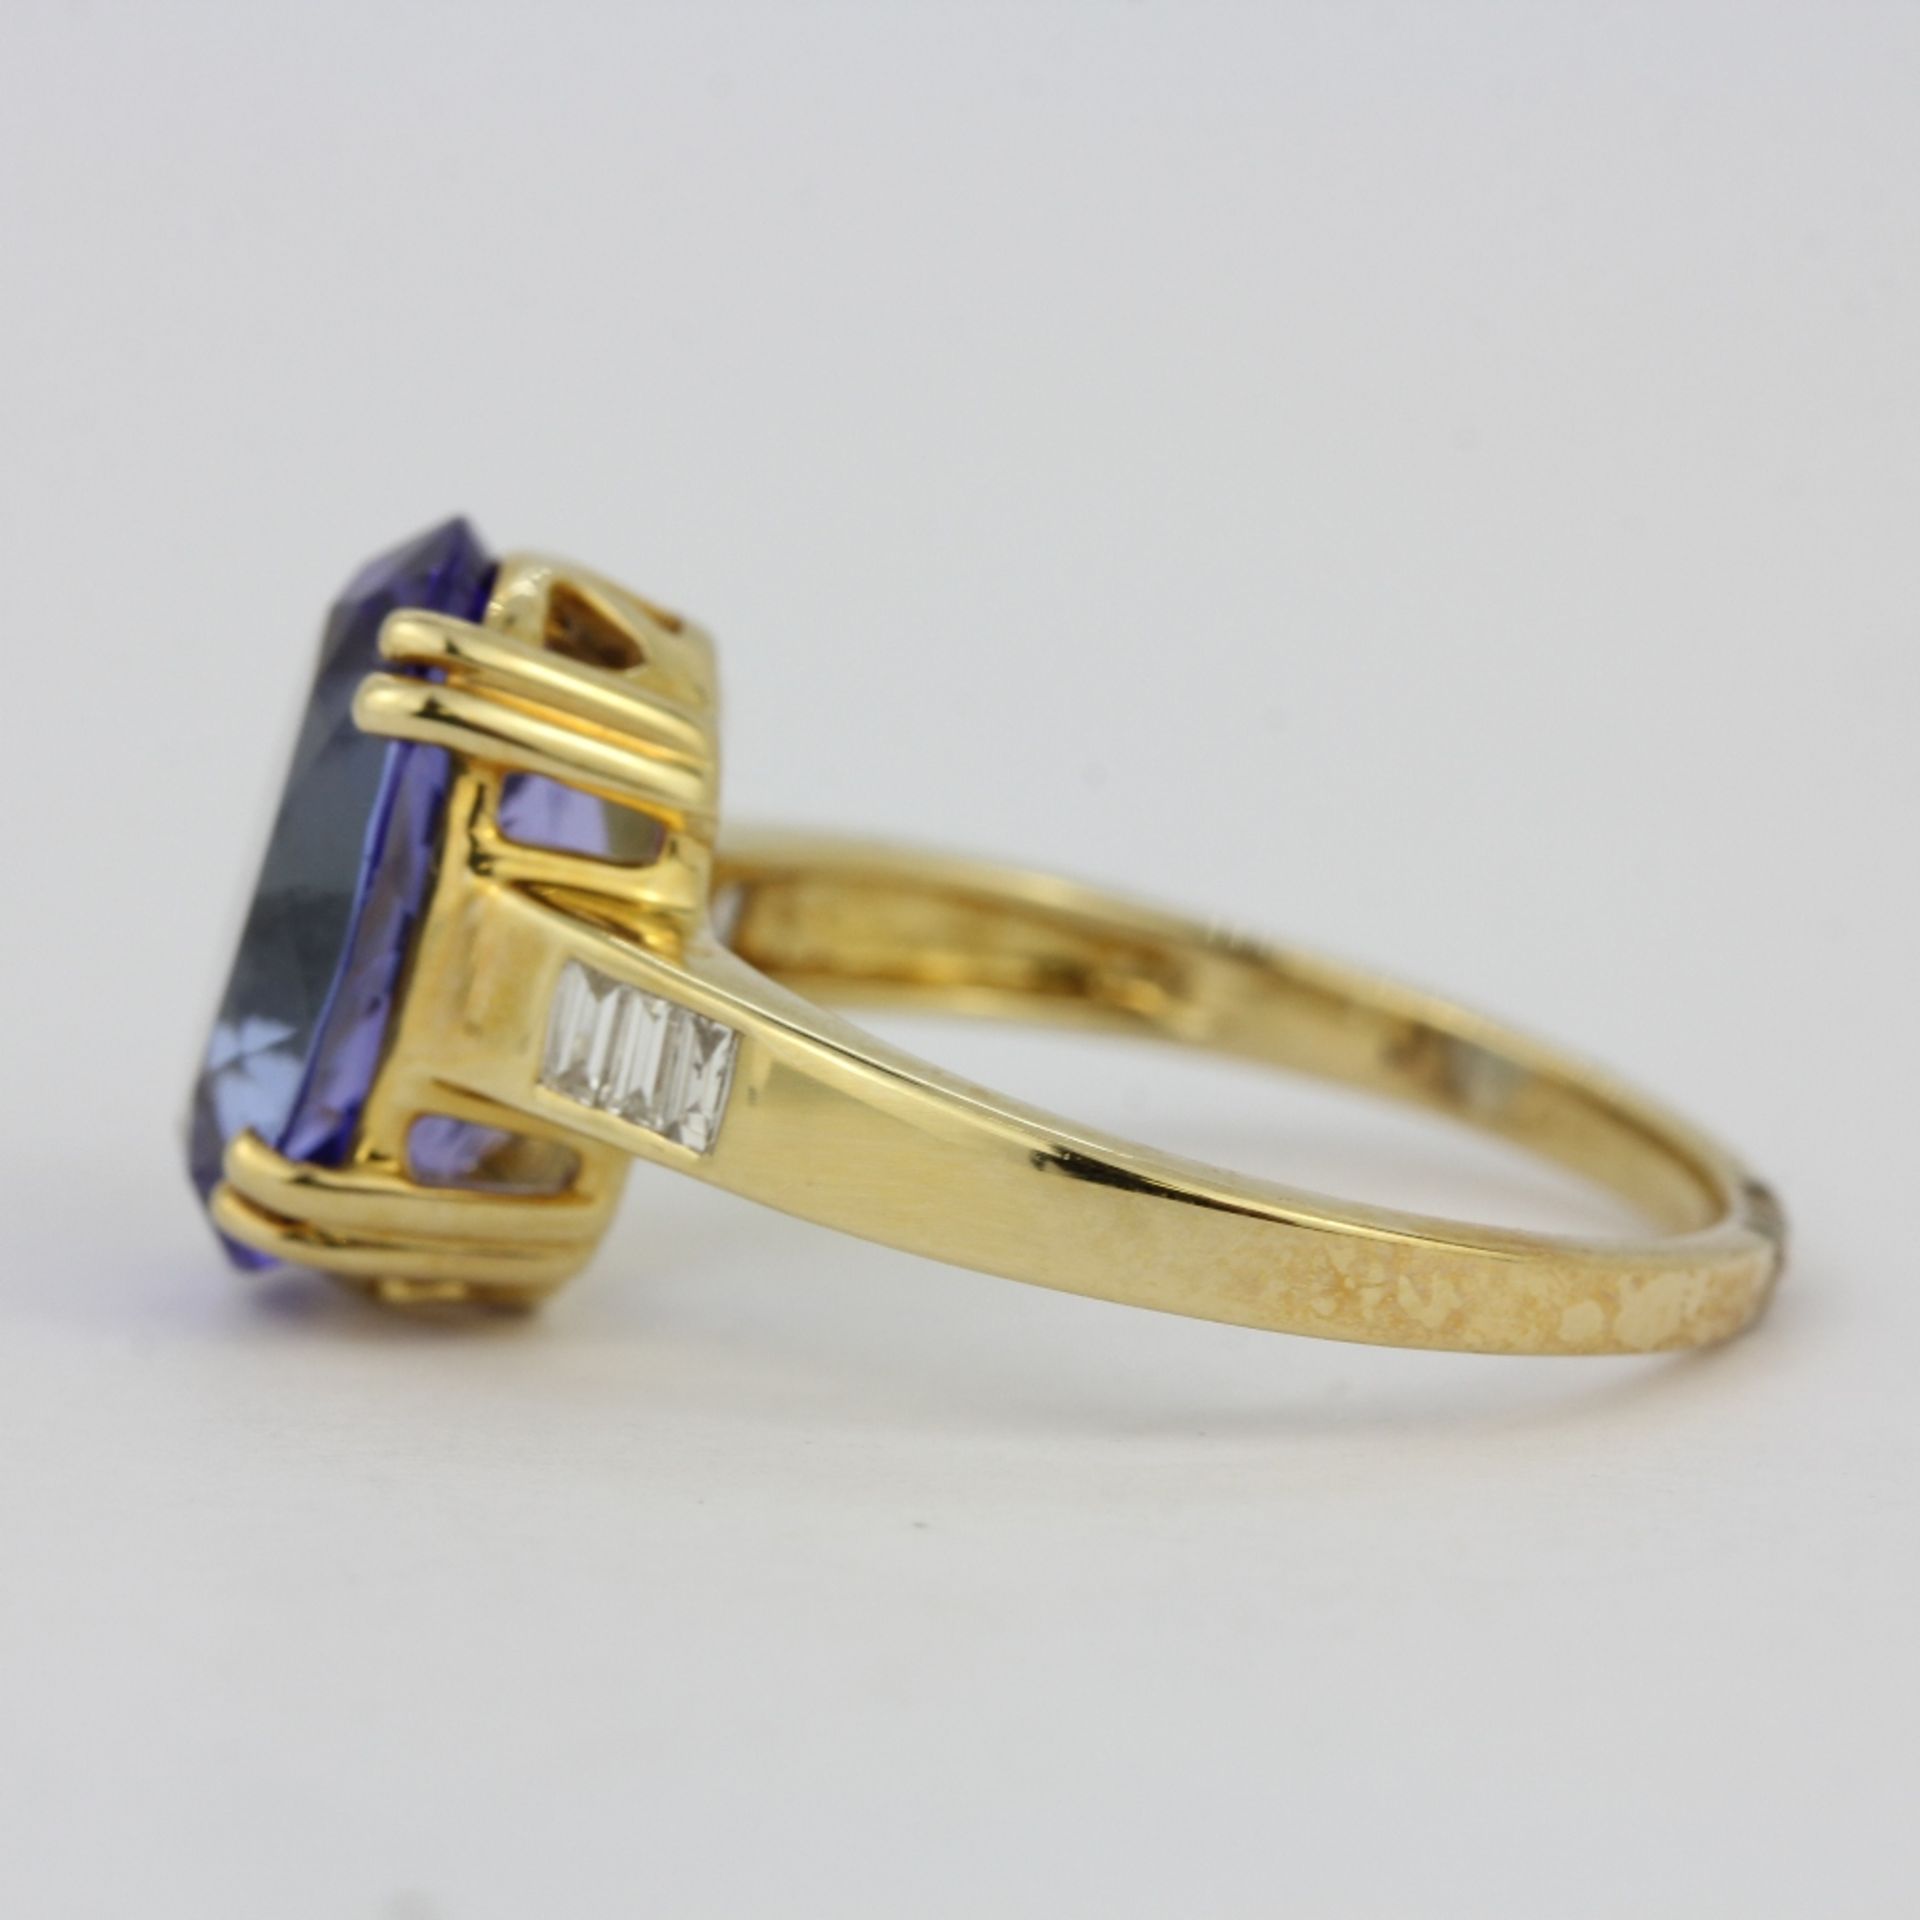 A hallmarked 14ct yellow gold ring set with a large oval cut tanzanite and baguette cut diamond - Image 2 of 3